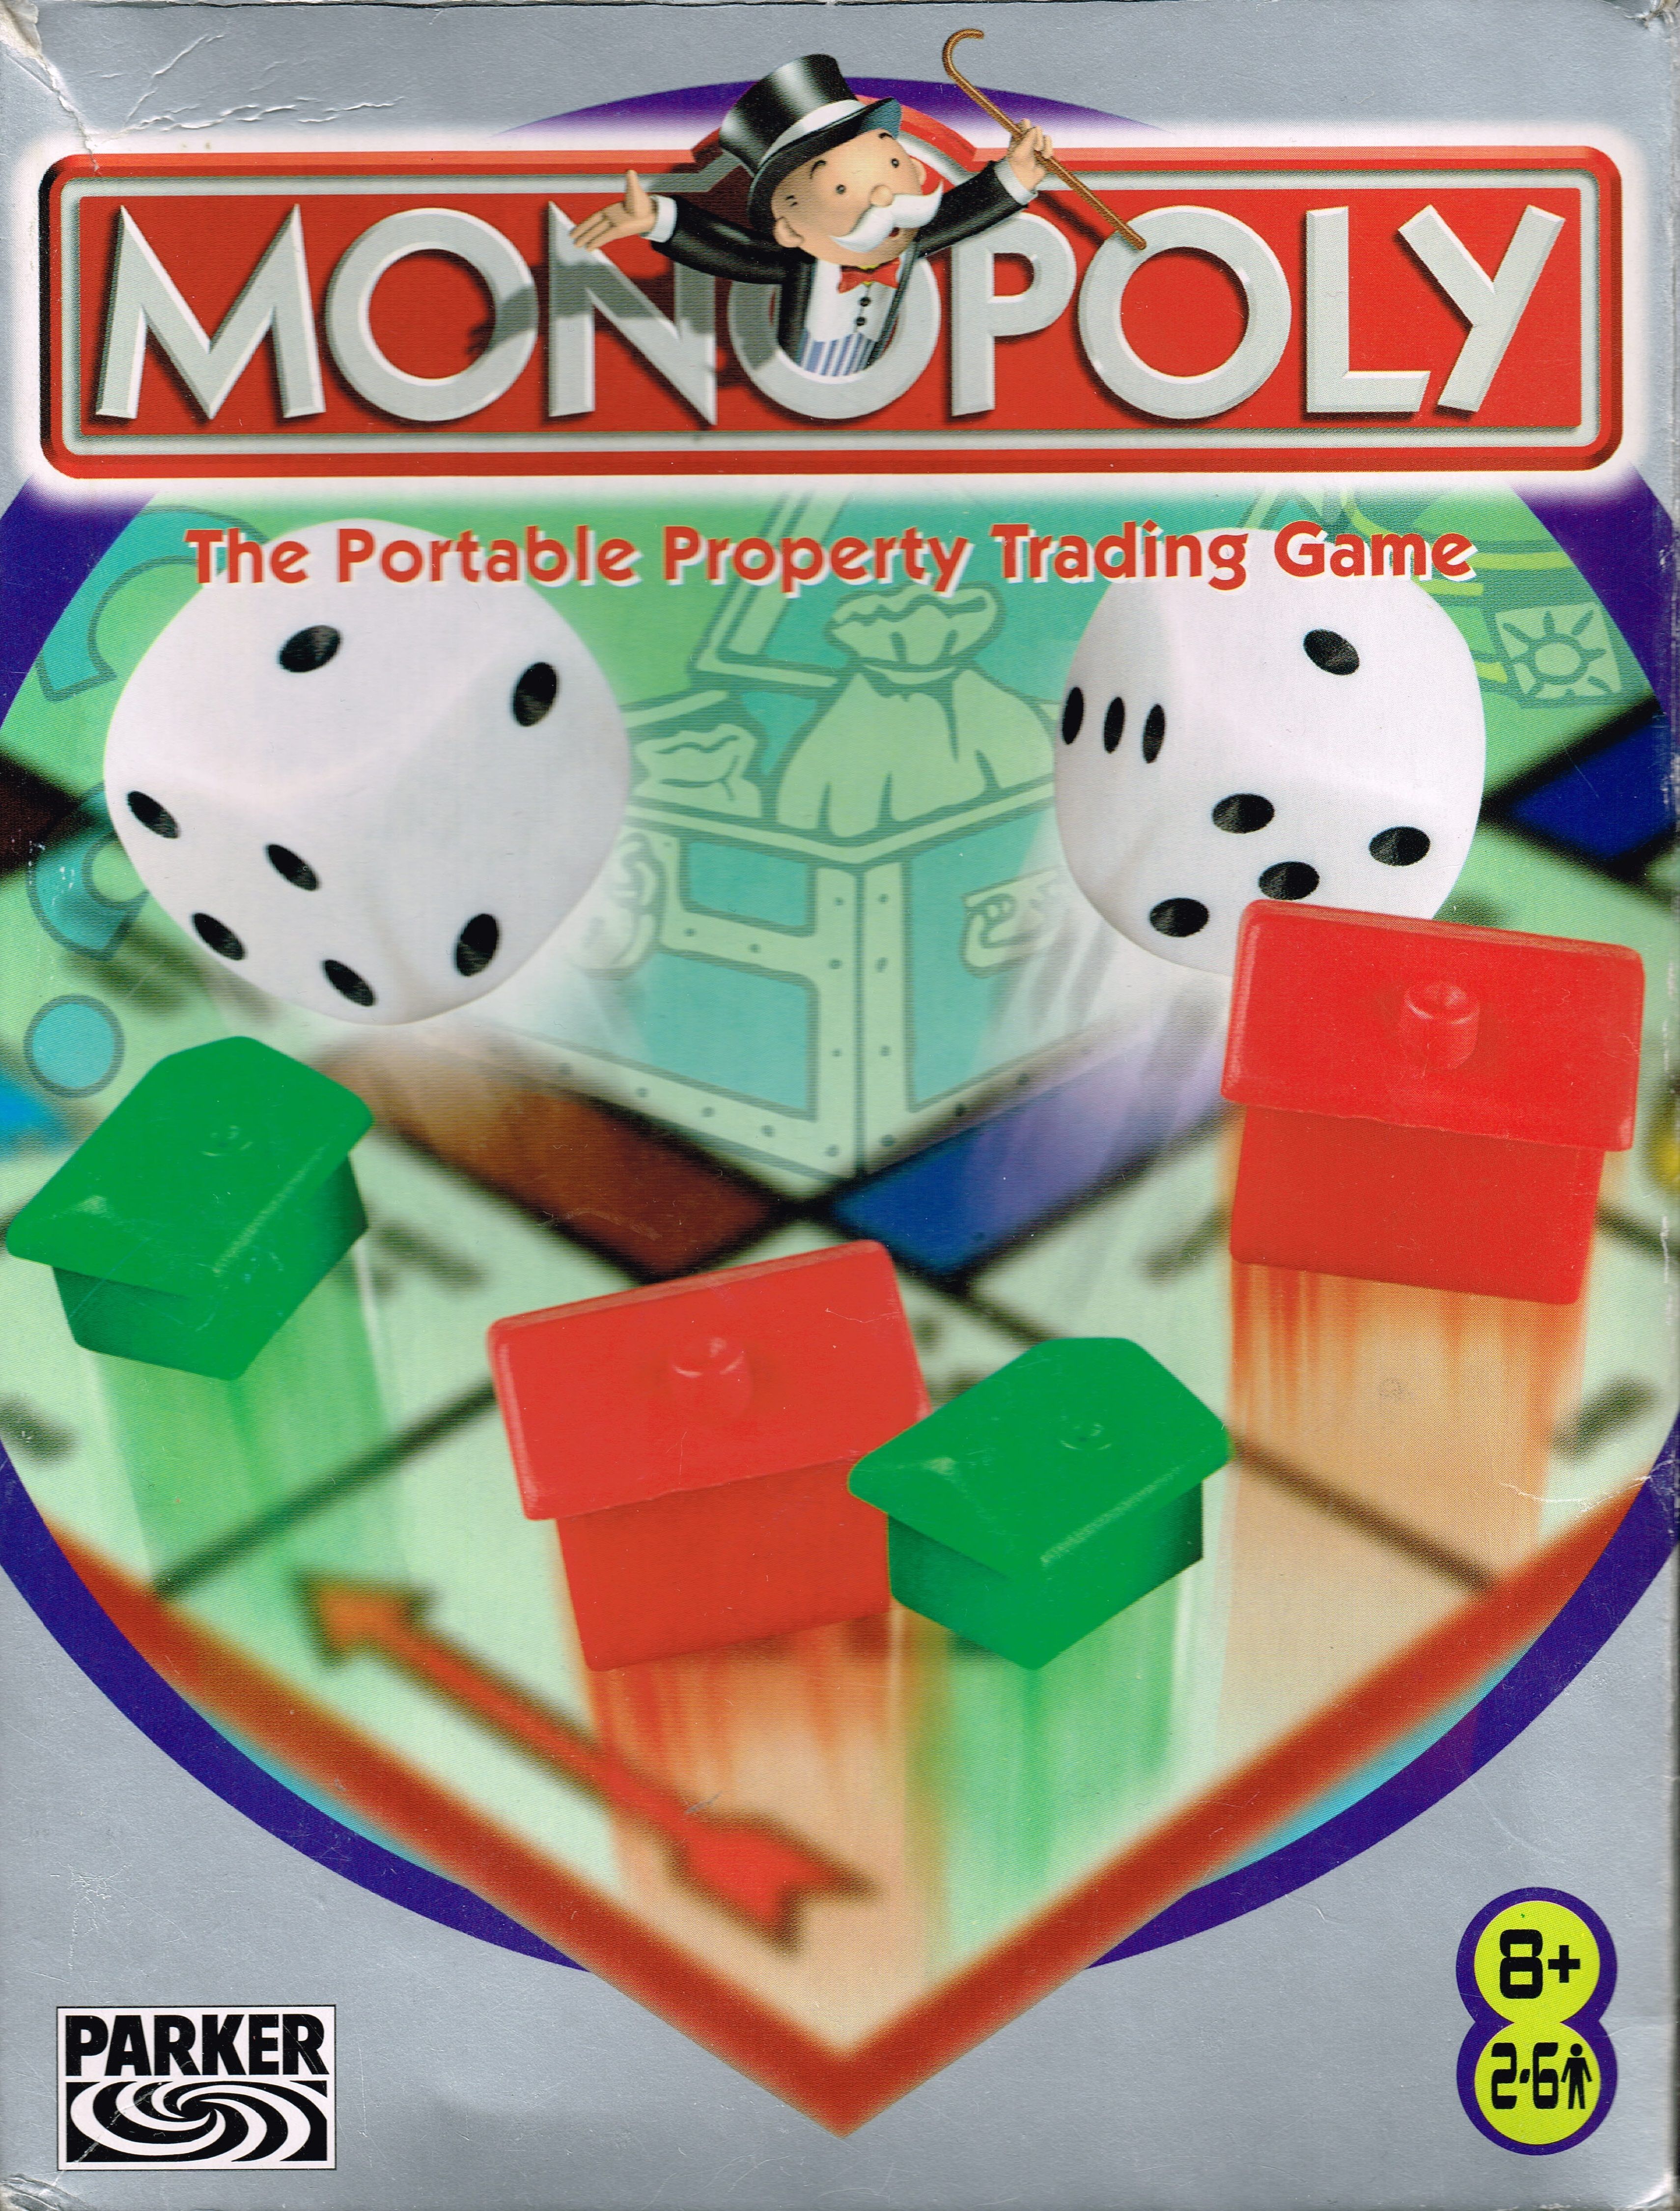 Monopoly: The Portable Property Trading Game